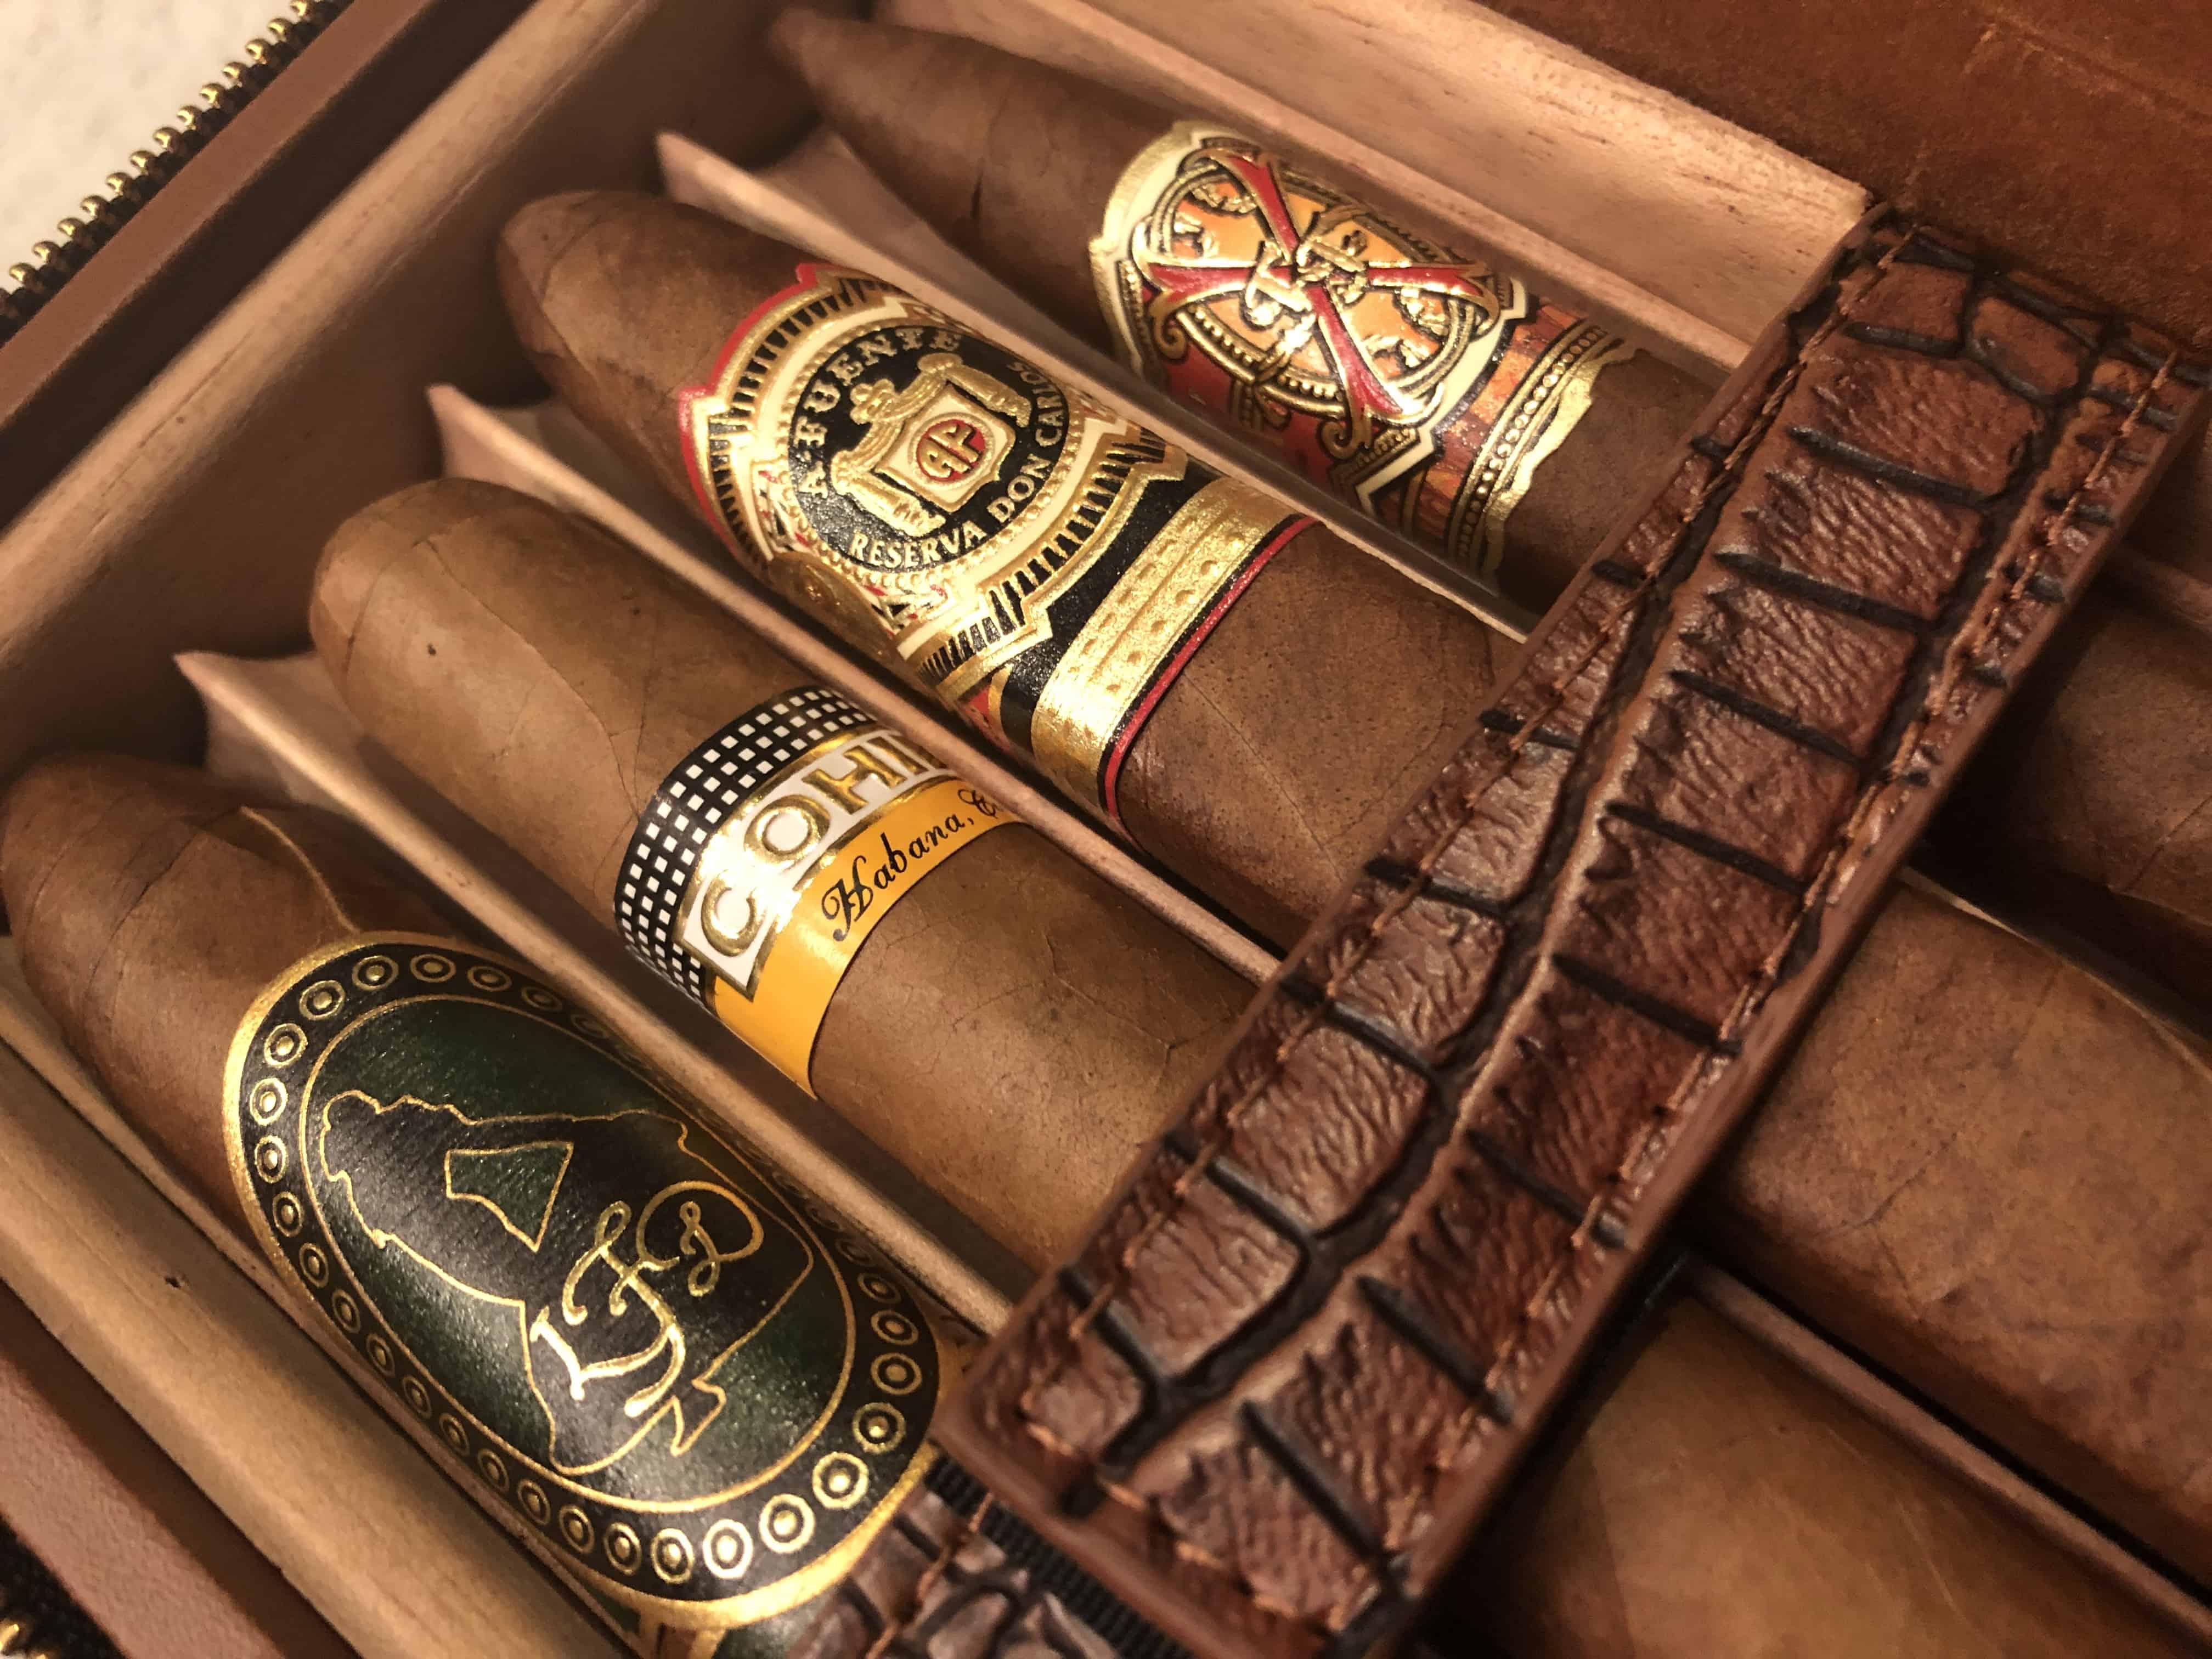 Luxury Cigar Club Reviews: Get All The Details At Hello Subscription!